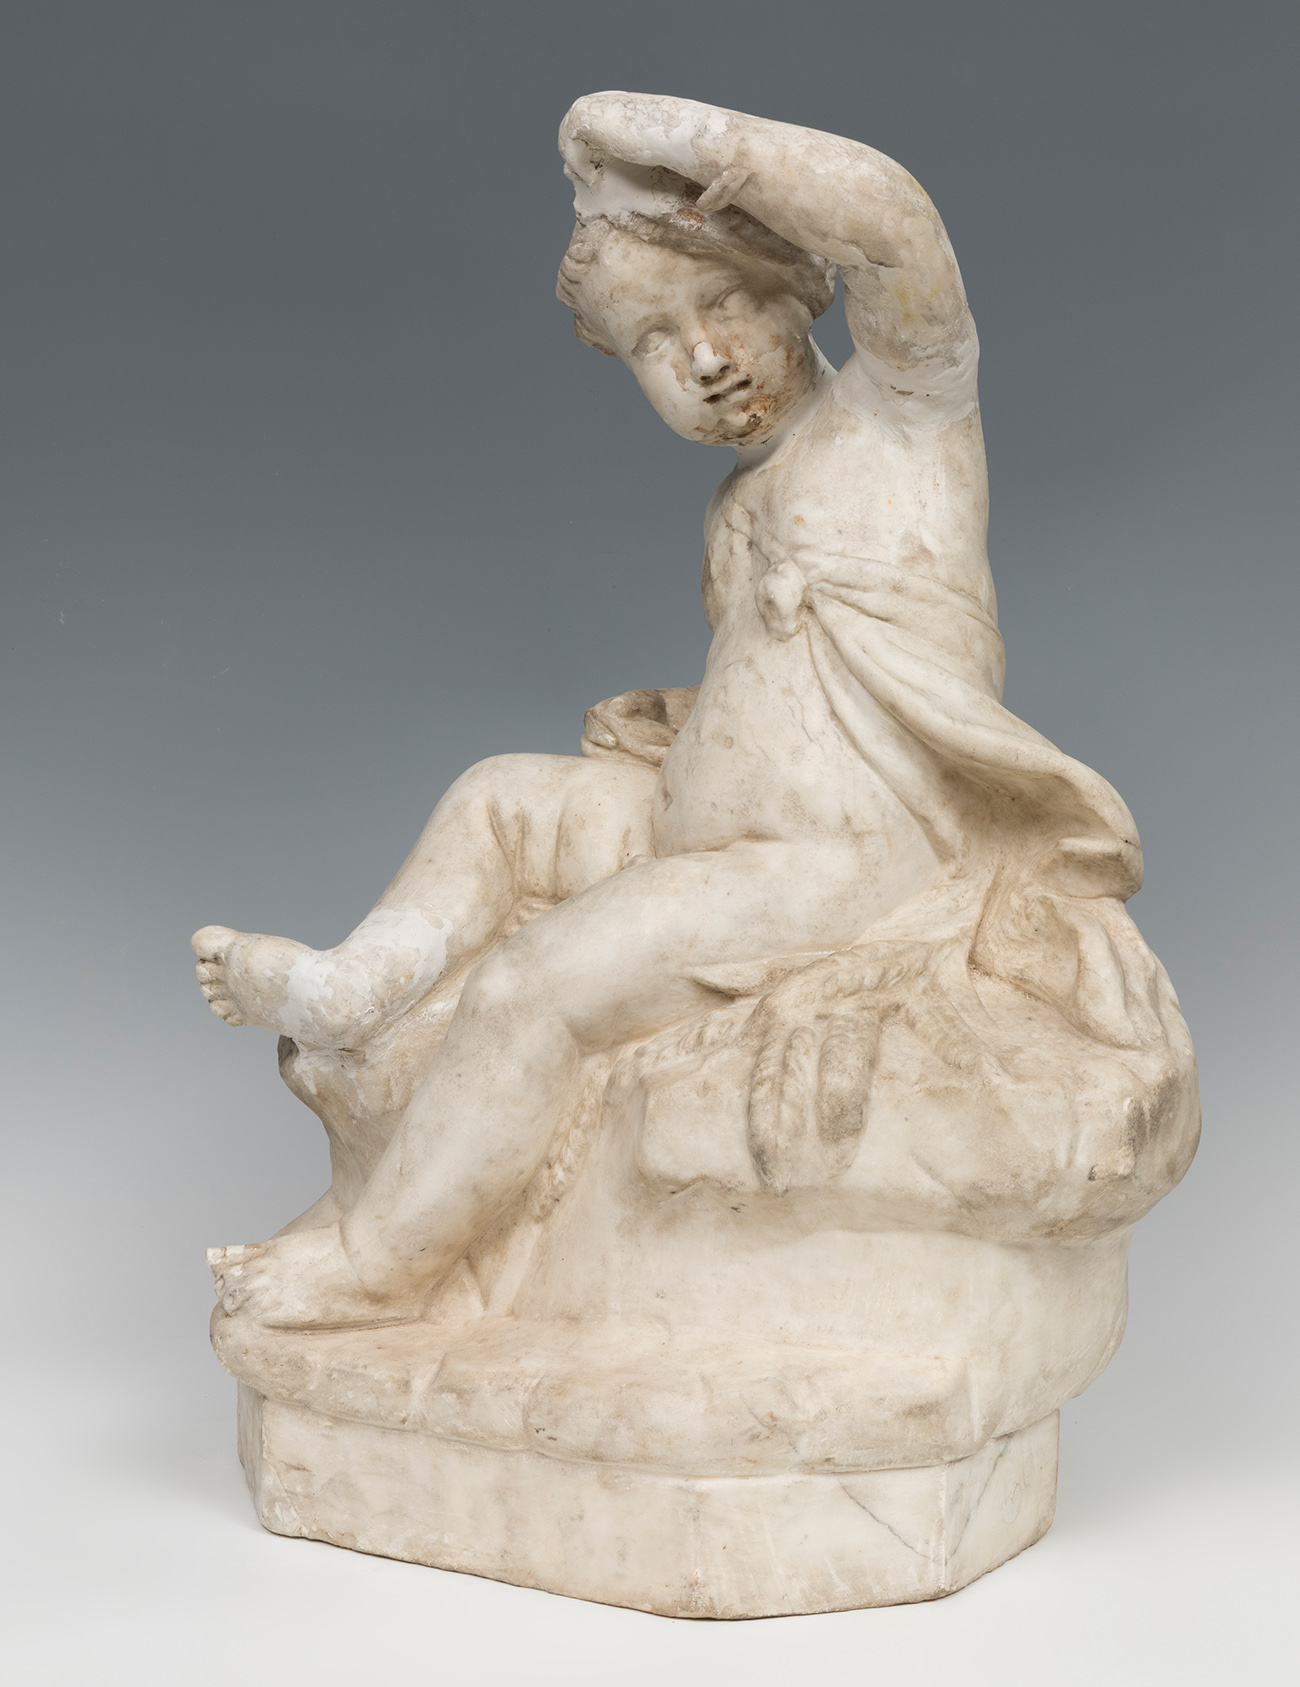 Italian school of the 18th century."Allegory of summer".Carved marble.It presents restorations and